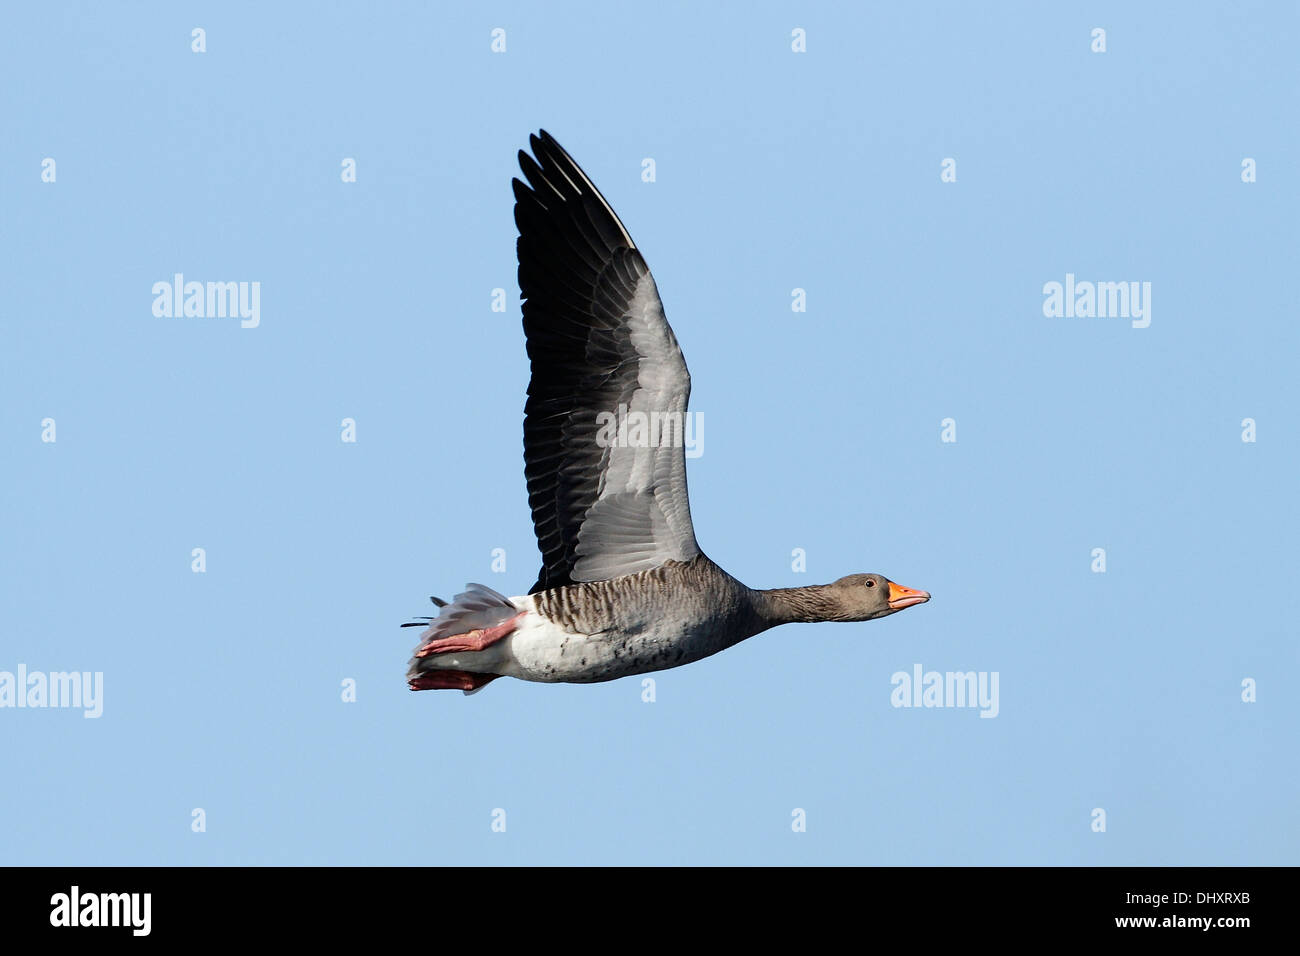 A Greylag Goose (Anser anser) in flight against a clear blue sky. Stock Photo